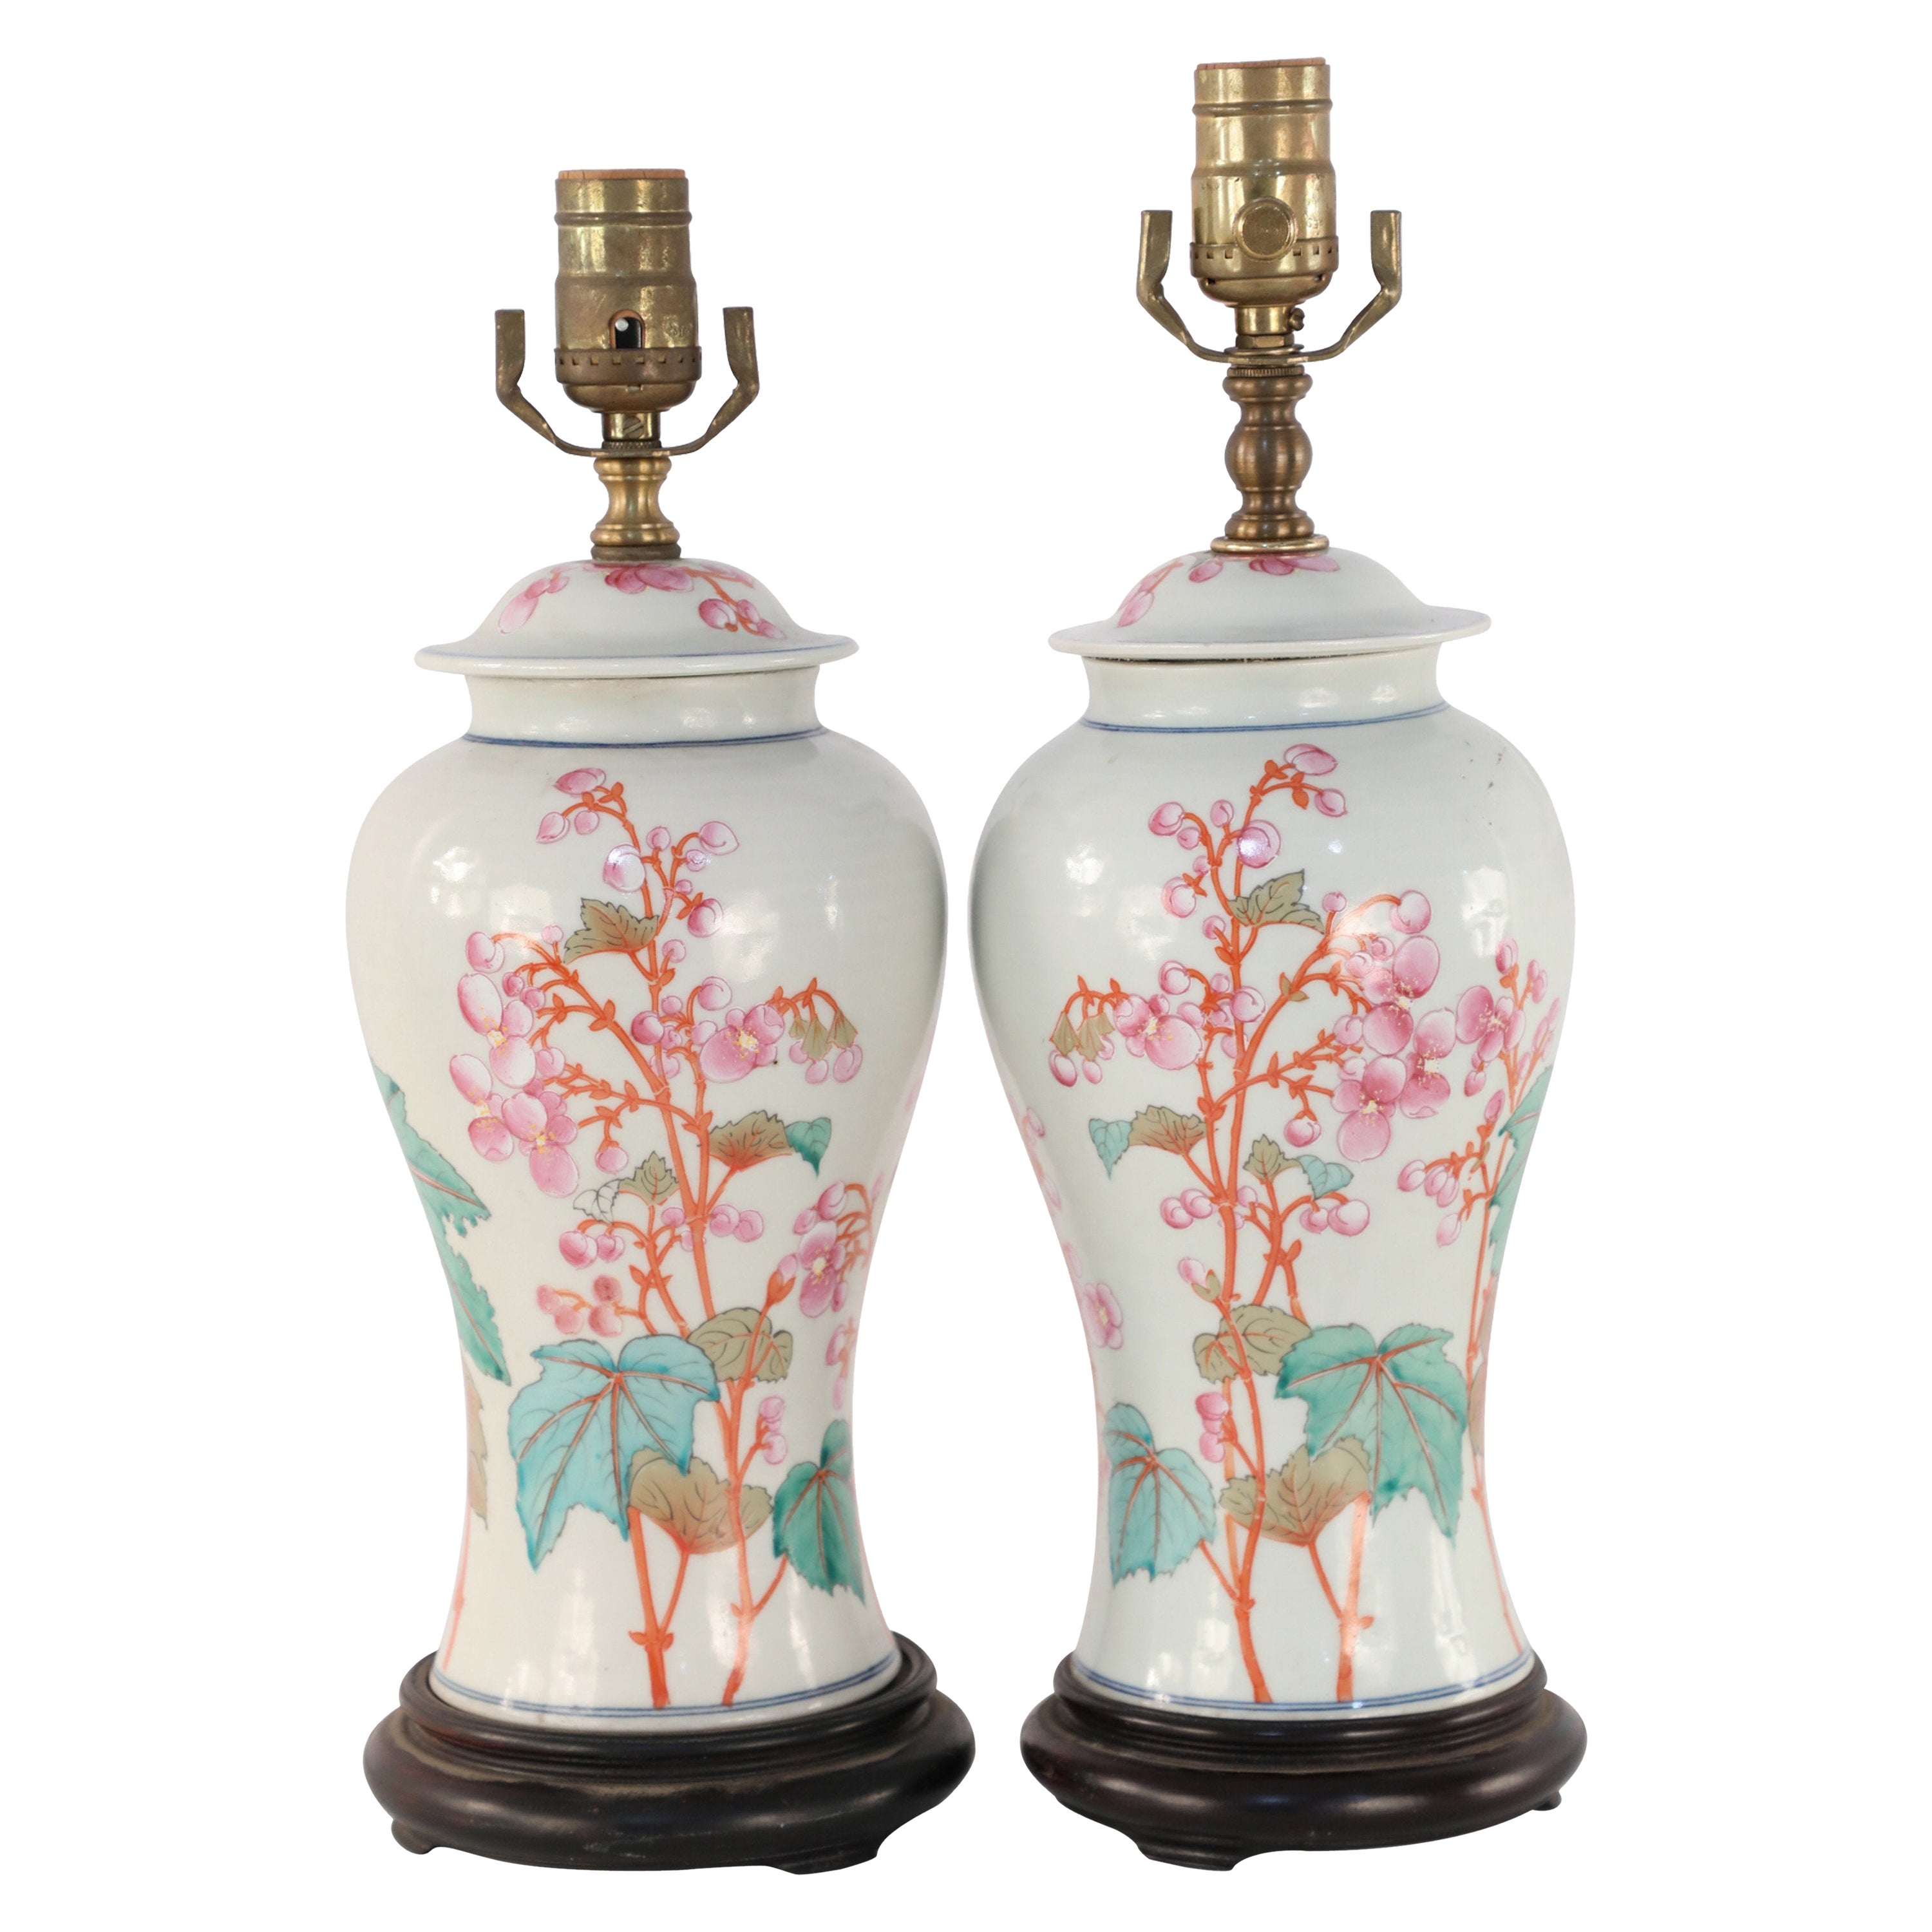 Pair of Chinese Off-White Orange and Pink Floral Motif Porcelain Table Lamps